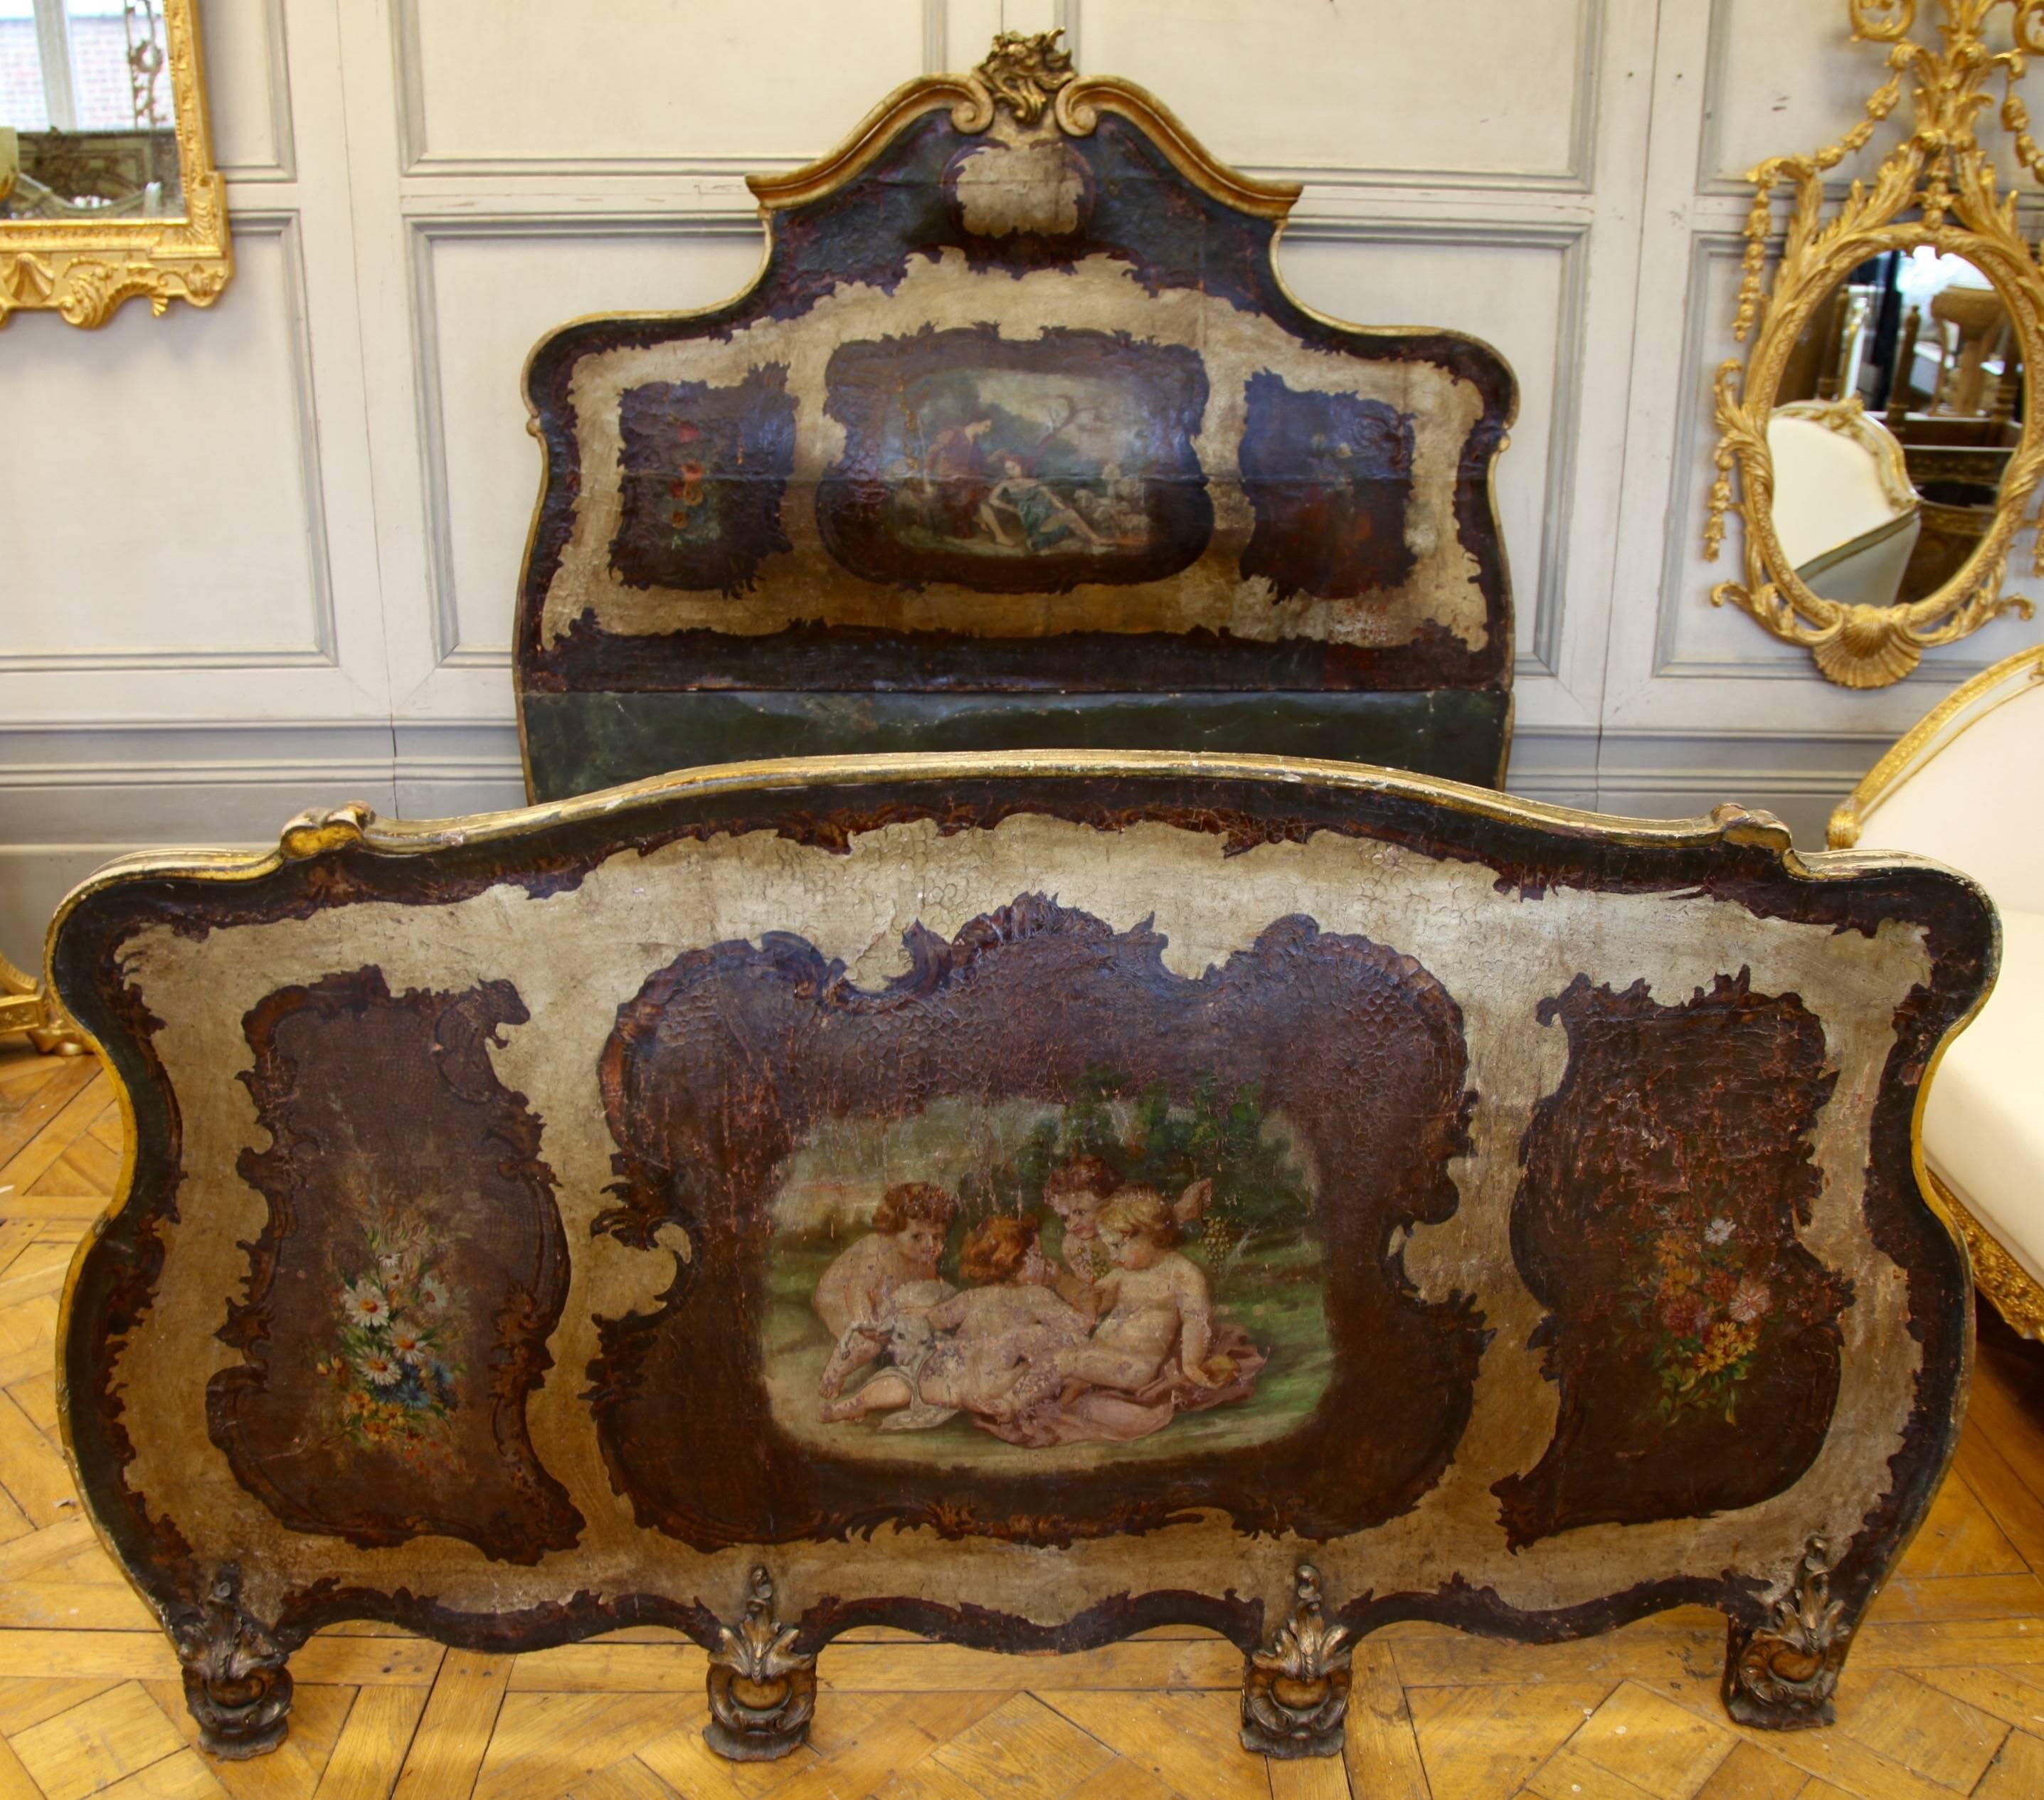 19th century Venetian bed. A rare find. Bombe shaped footboard. Painted and gilded on leather depicting cherubs and a romantic scene. Large mattress size.